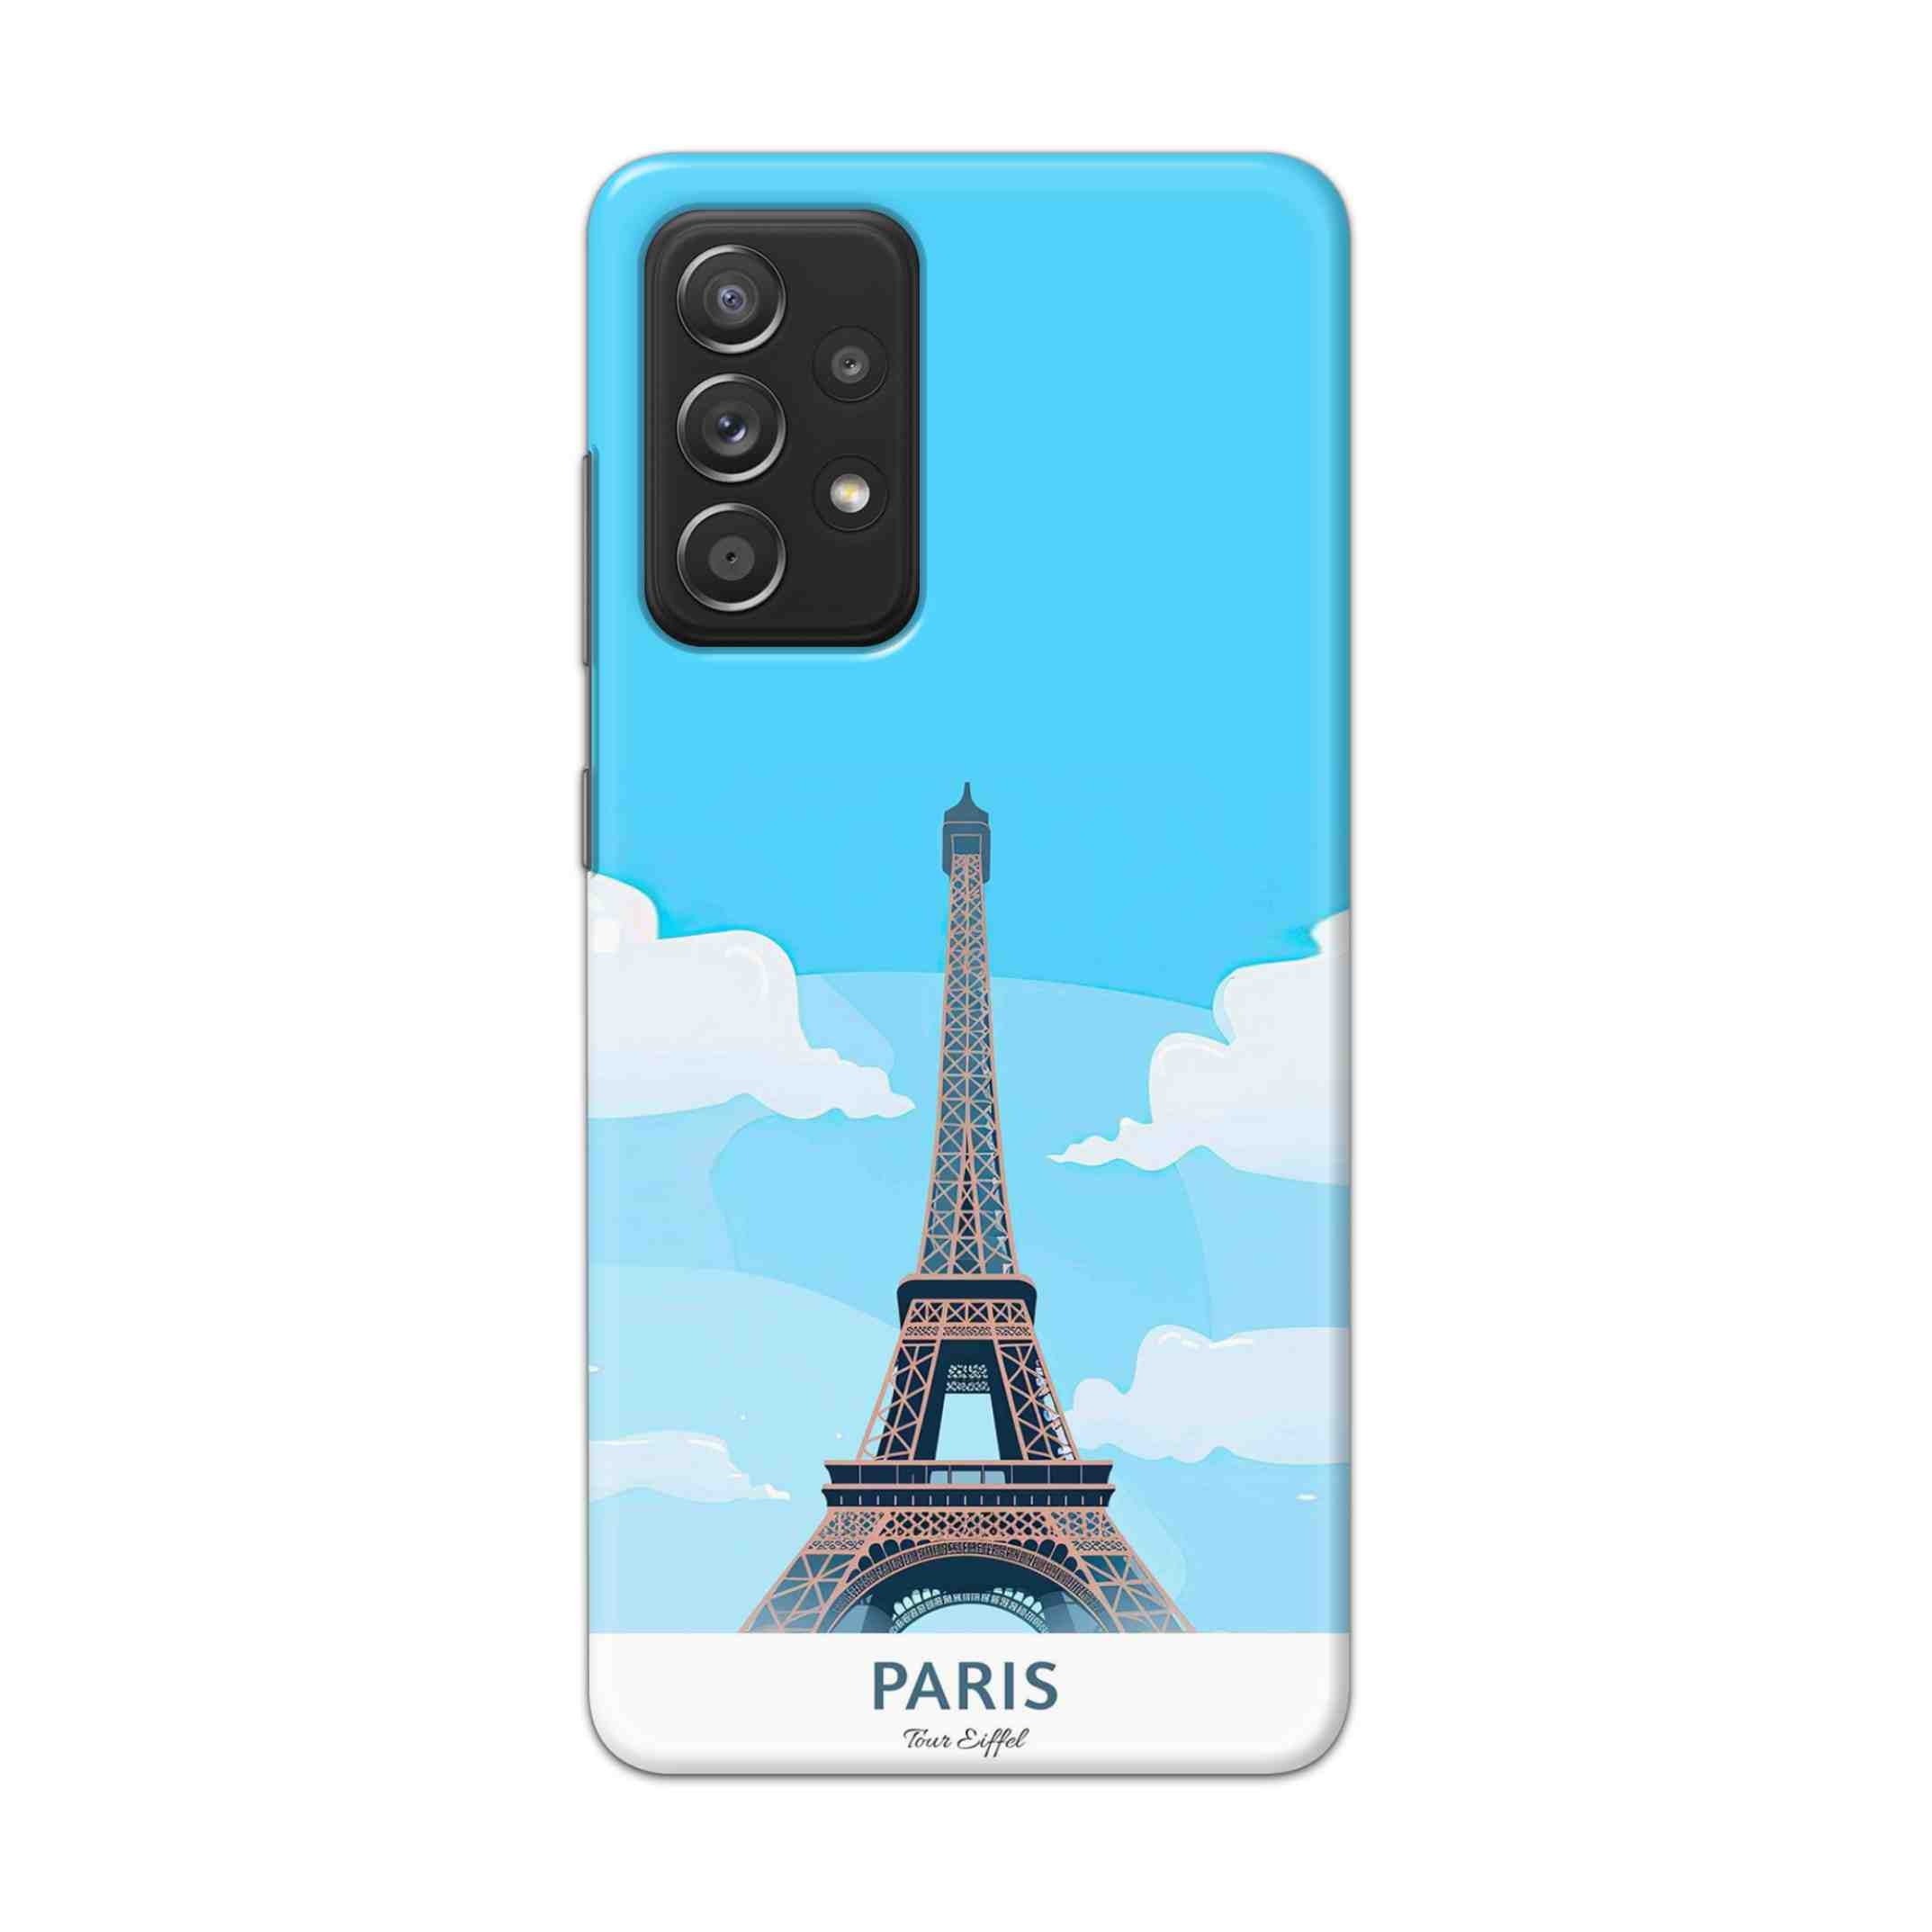 Buy Paris Hard Back Mobile Phone Case Cover For Samsung Galaxy A52 Online